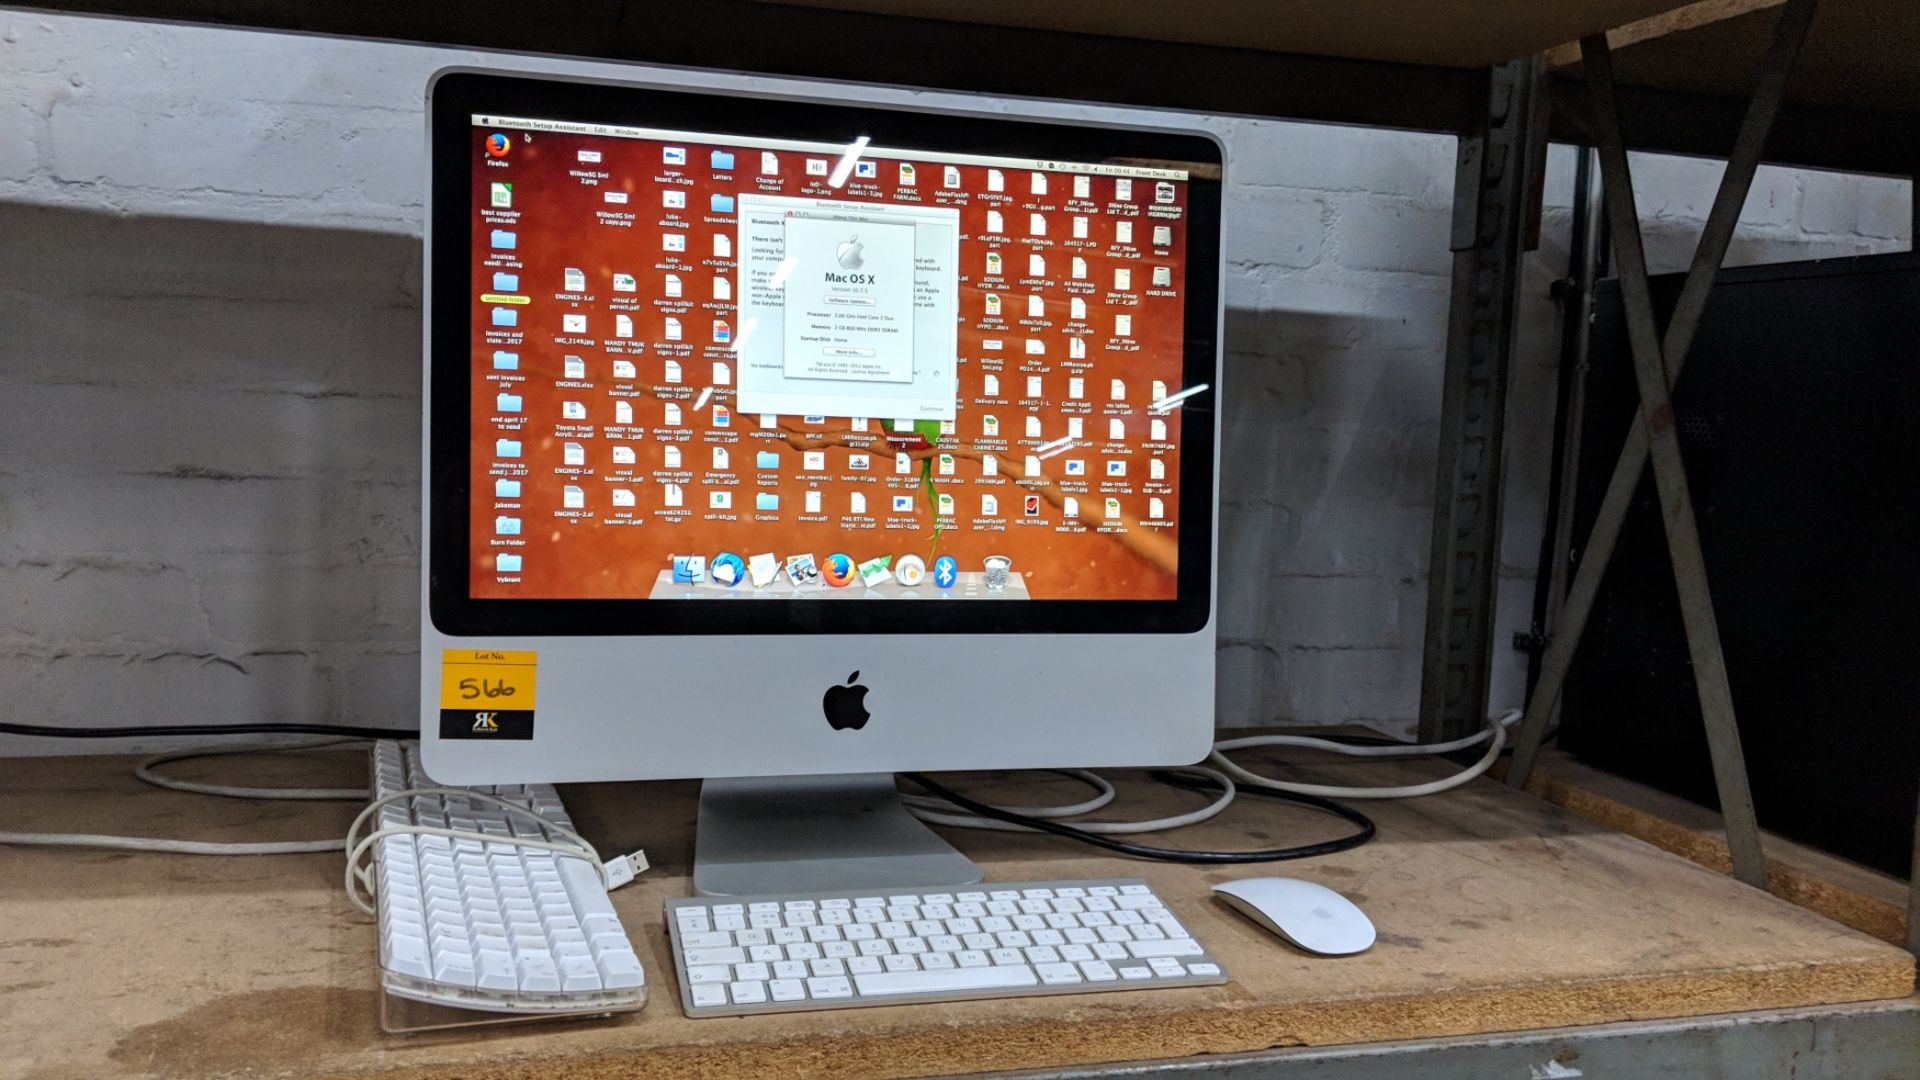 Apple iMac all in one computer with built-in 20" widescreen monitor, type A1224, EMC number 2210, - Image 2 of 7